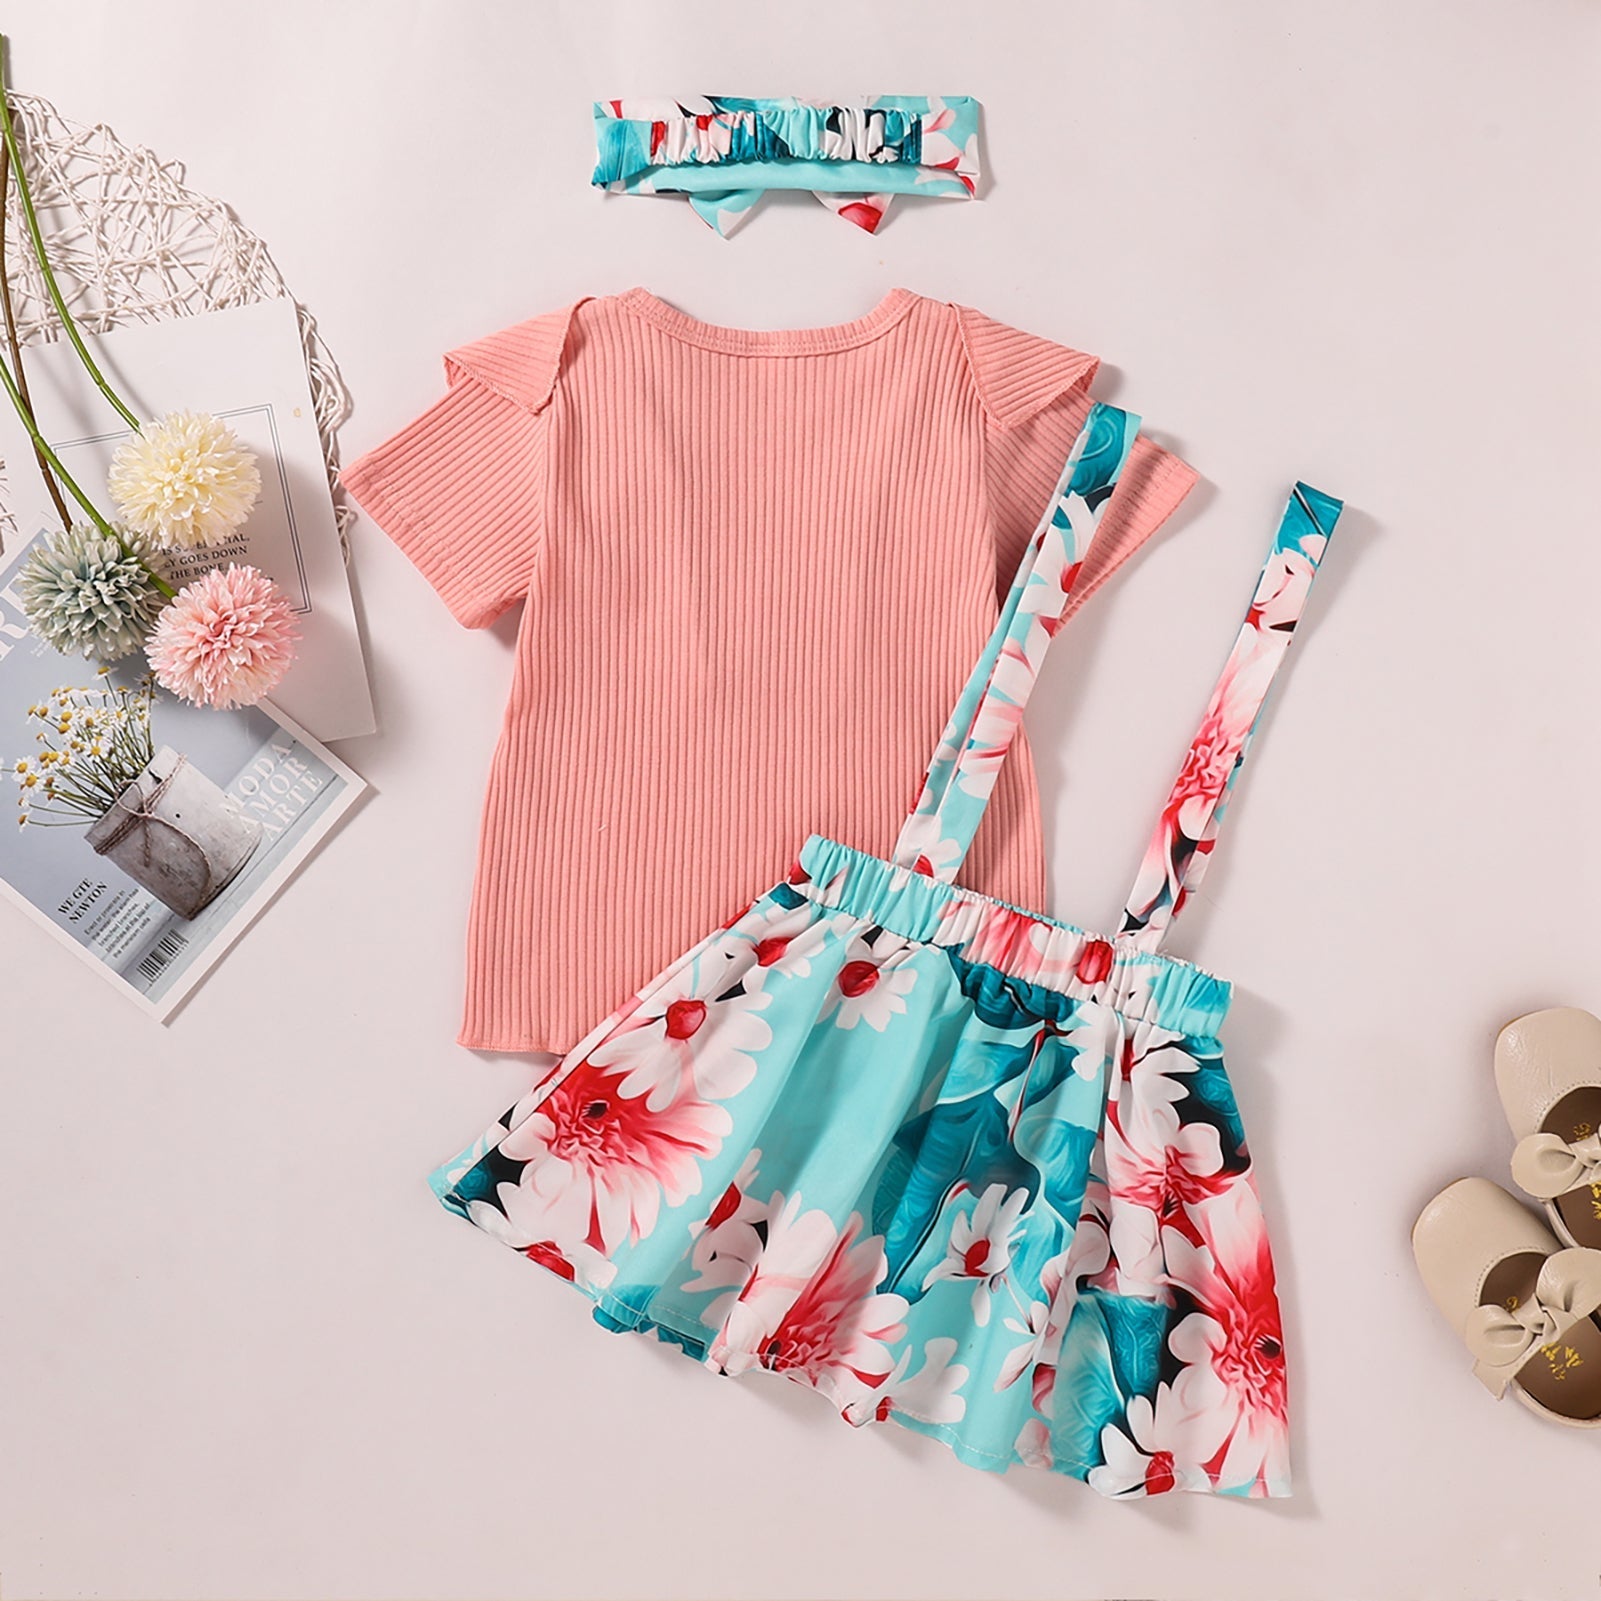 Girls Ruffle Trim Tee Shirt and Floral Pinafore Skirt Set Age: 1-6y - Fashion Girl Online Store